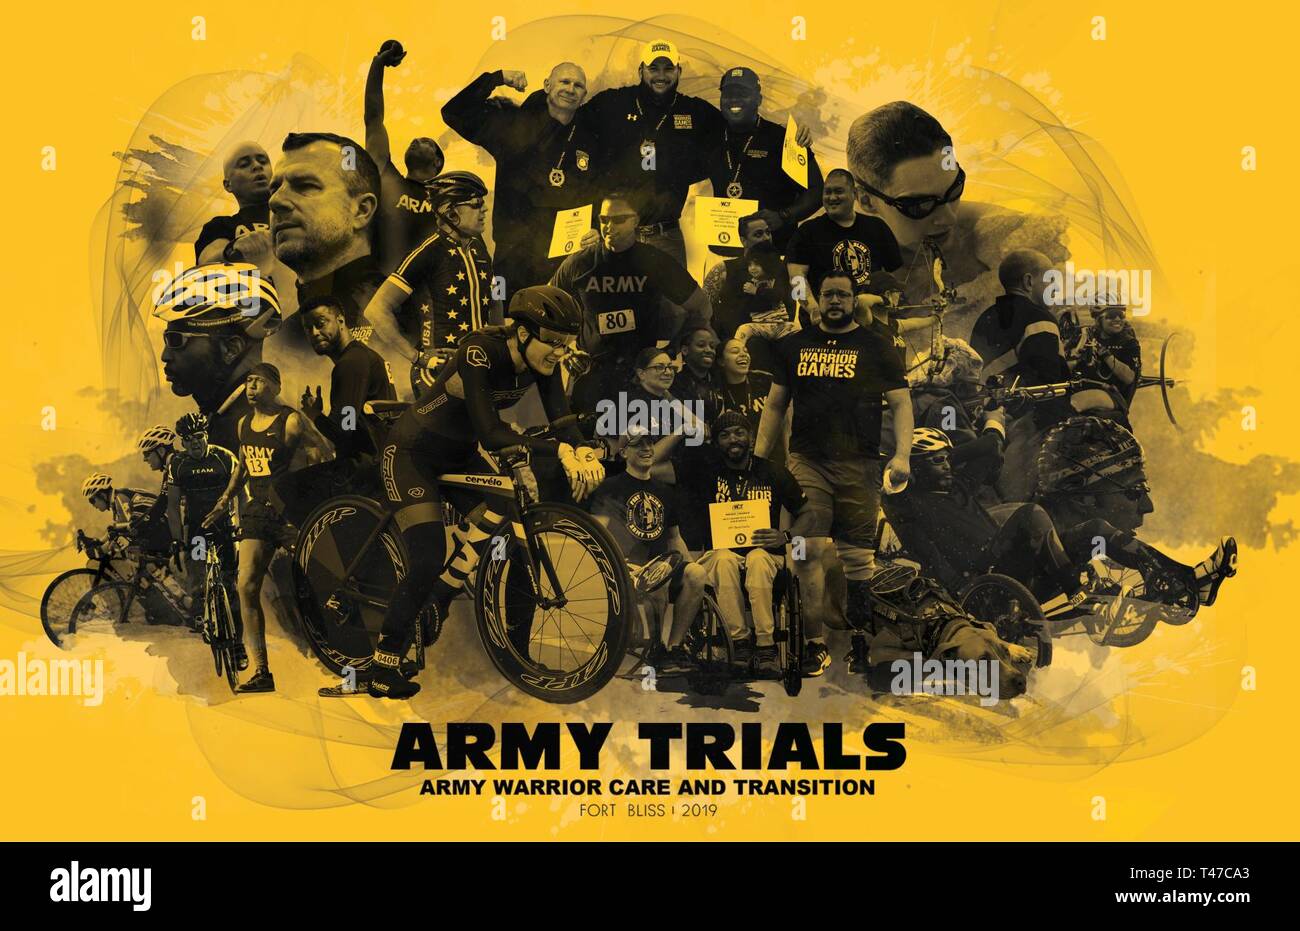 FORT BLISS, Texas – Over 80 wounded, ill and injured Soldiers and veterans came to Fort Bliss, Texas, to compete for a spot on Team Army for this year’s 2019 Department of Defense Warrior Games. After 10 days of intense competition in 14 different sports, the 2019 Army Trials is coming to a close. Stock Photo